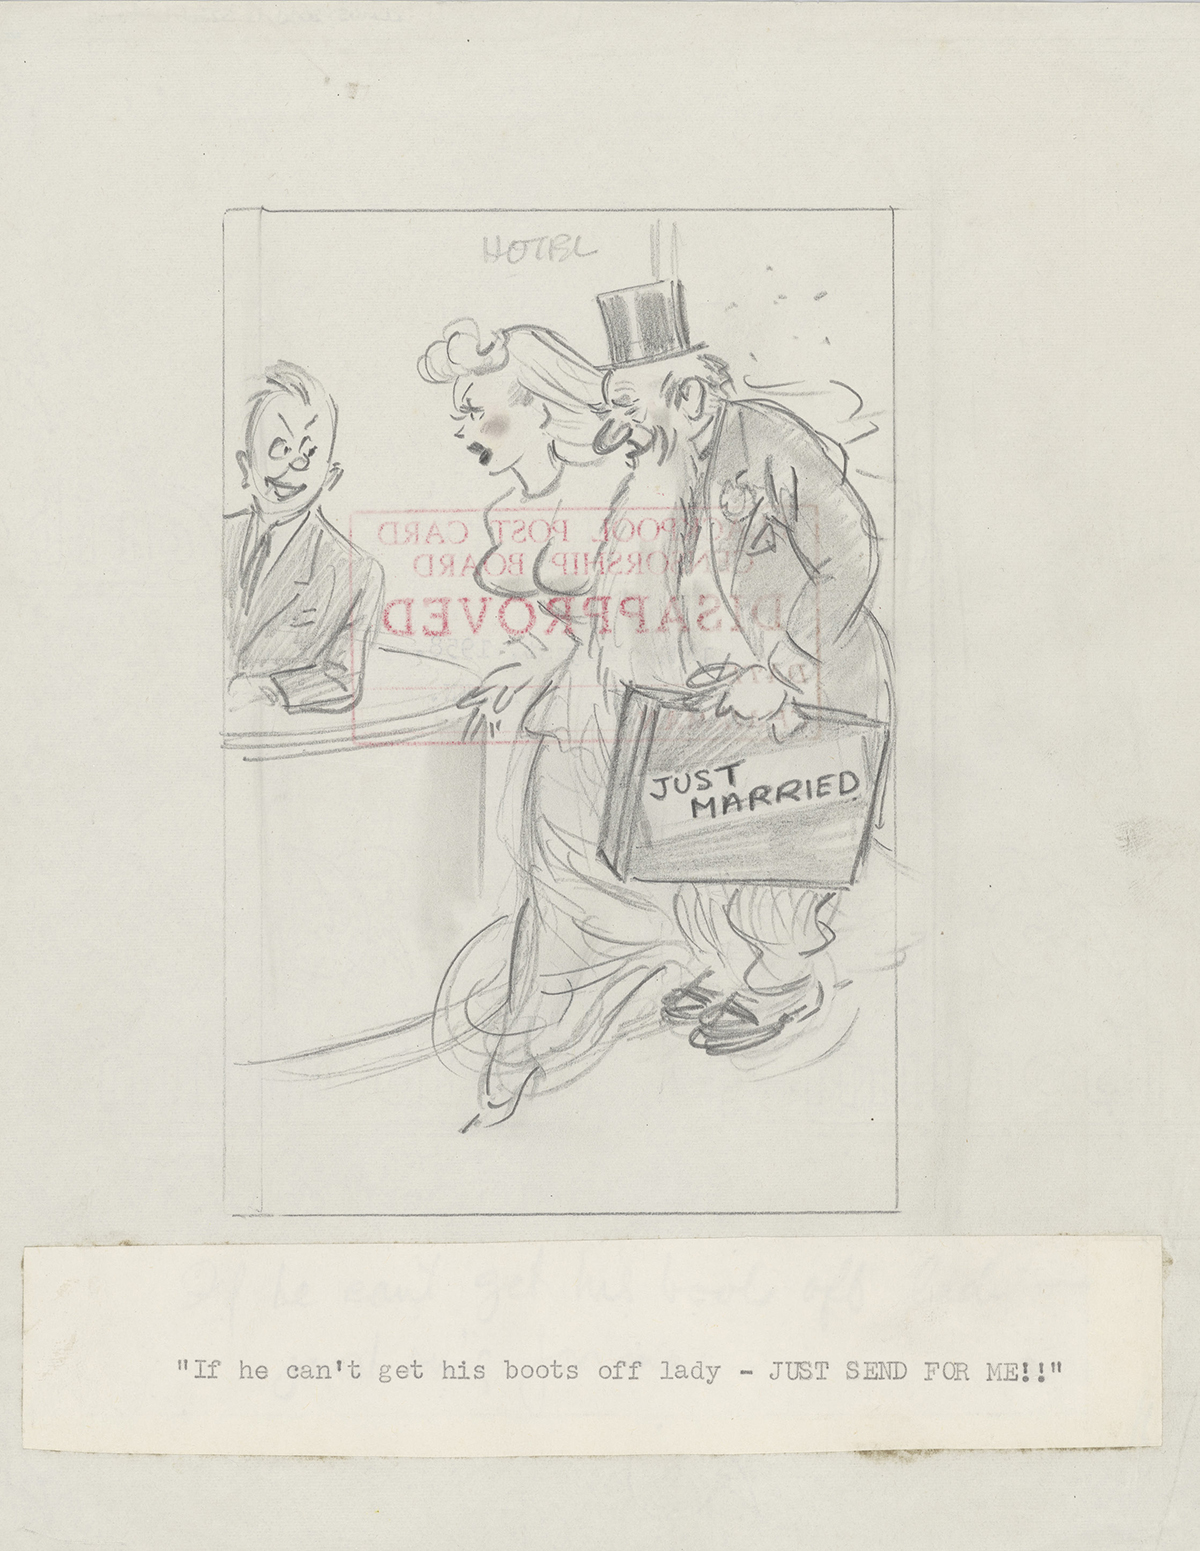 Sketch of recently married couple not approved by the Blackpool Censorship Board, 14 Aug 1958, © Bamforth & Co, on loan from Kirklees Museums and Galleries, E16367/01